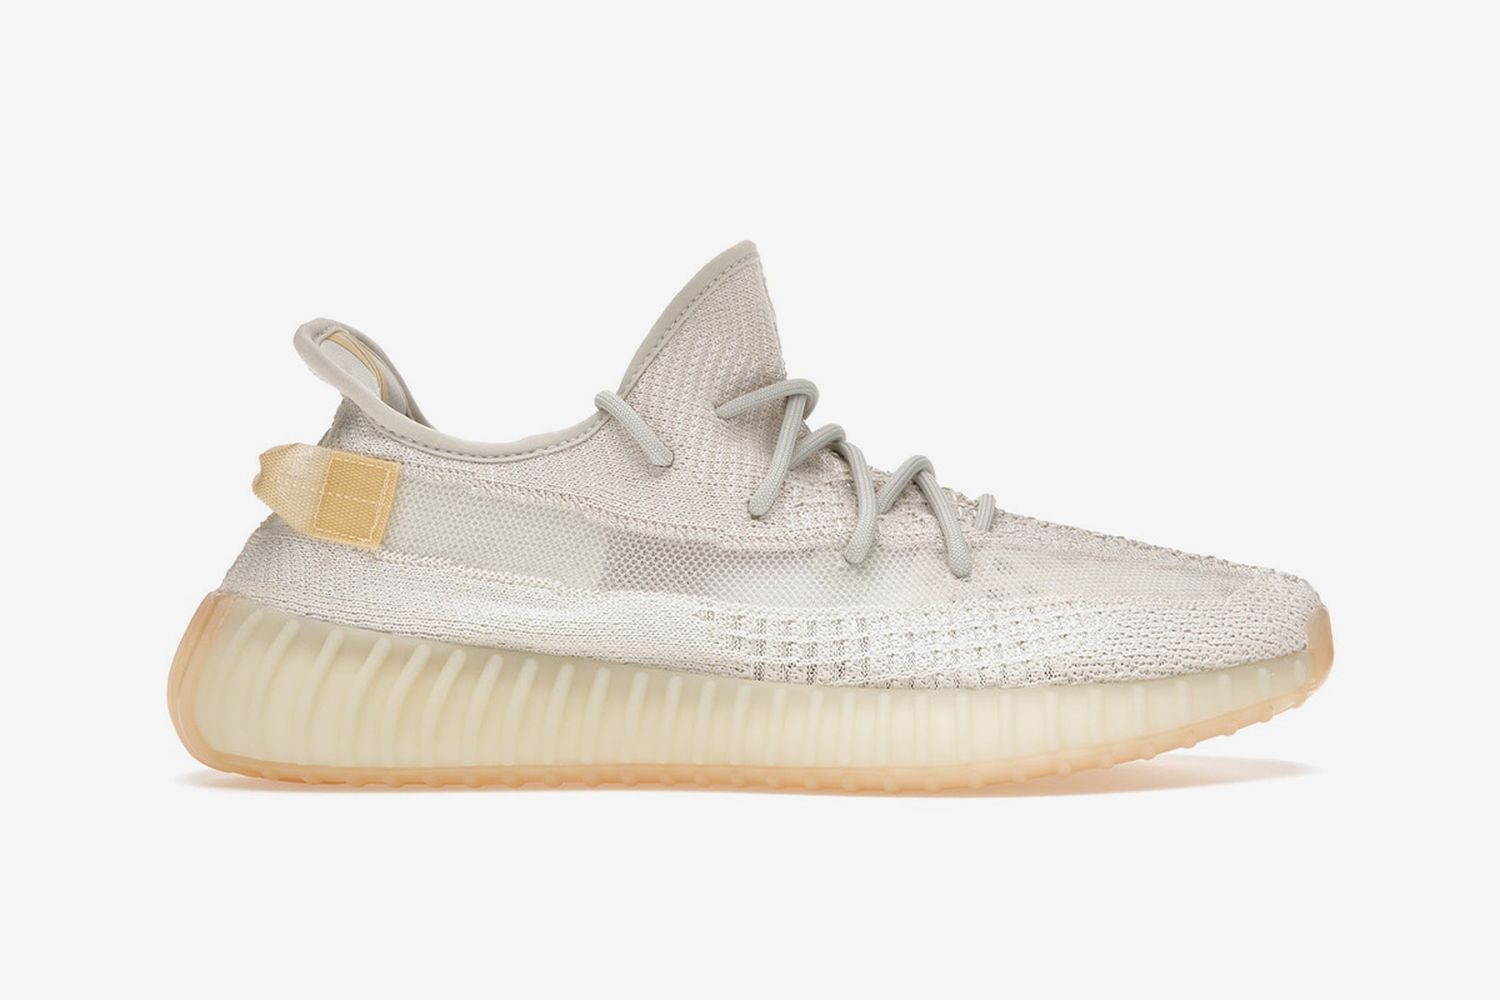 sød smag Katedral whisky adidas YEEZY Boost 350 V2 Light: Where to Buy & Resale Prices